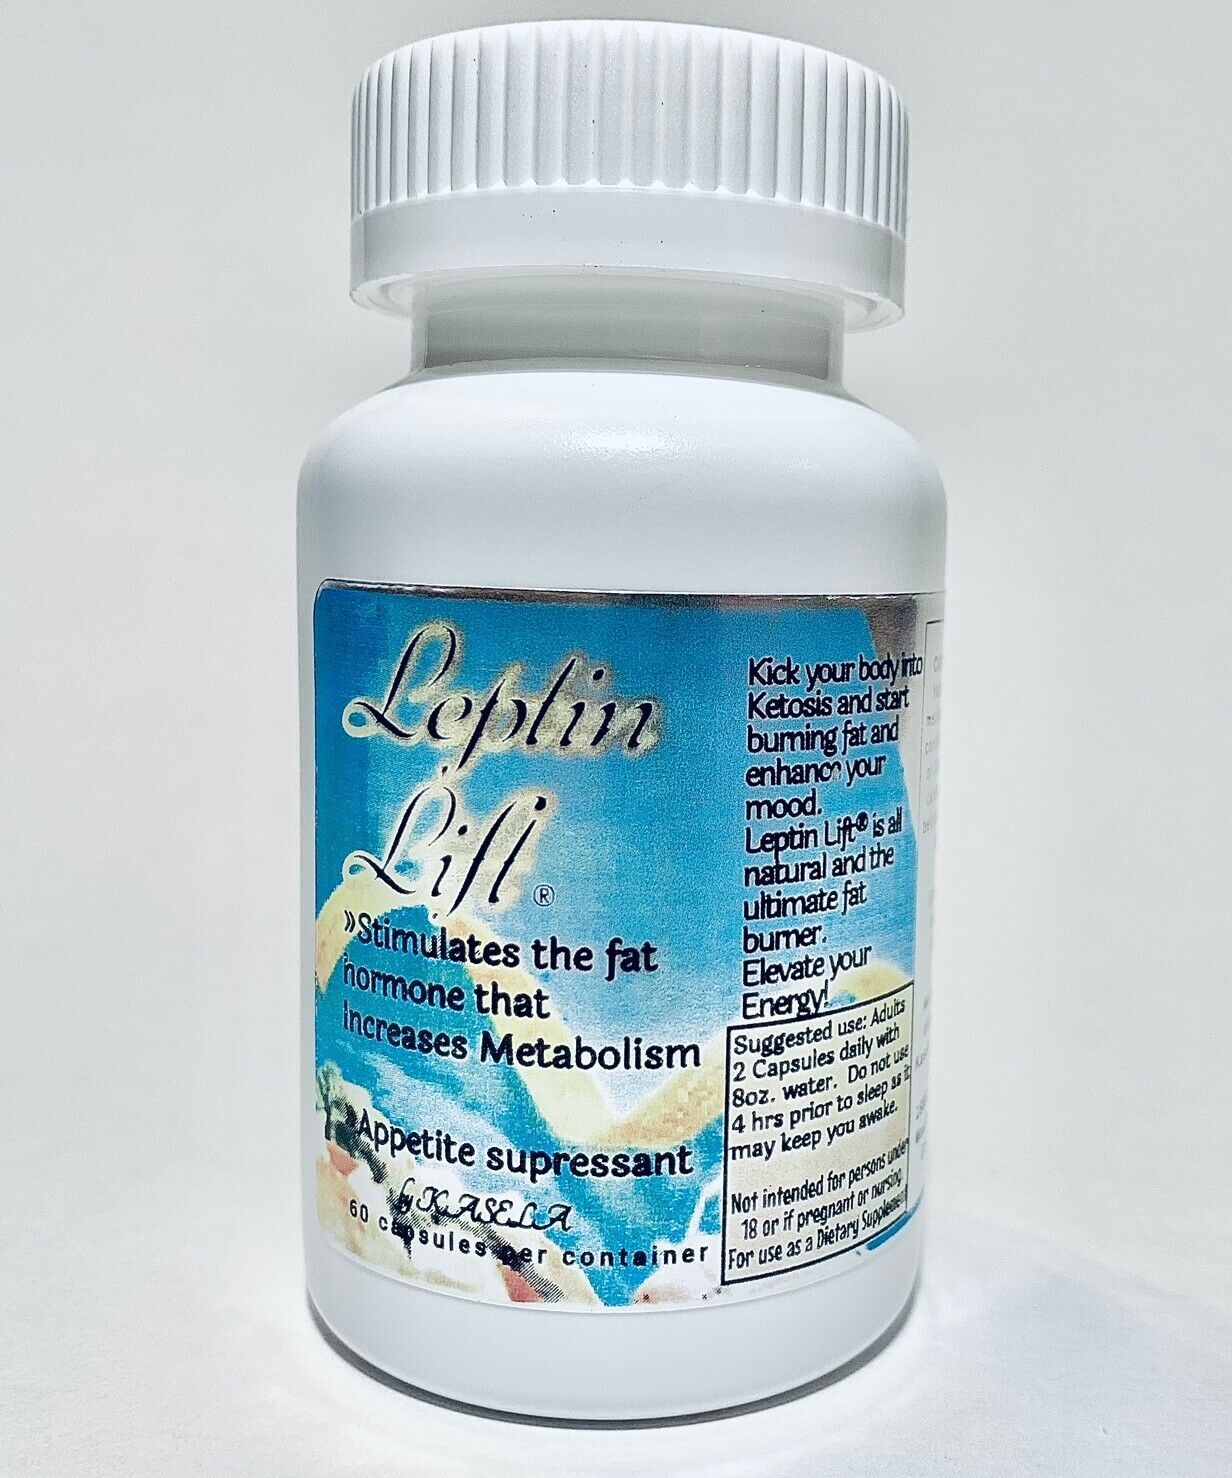 Diet Pills That Work Fast Weight Loss Extreme Appetite Suppressant, Loose Fat!!